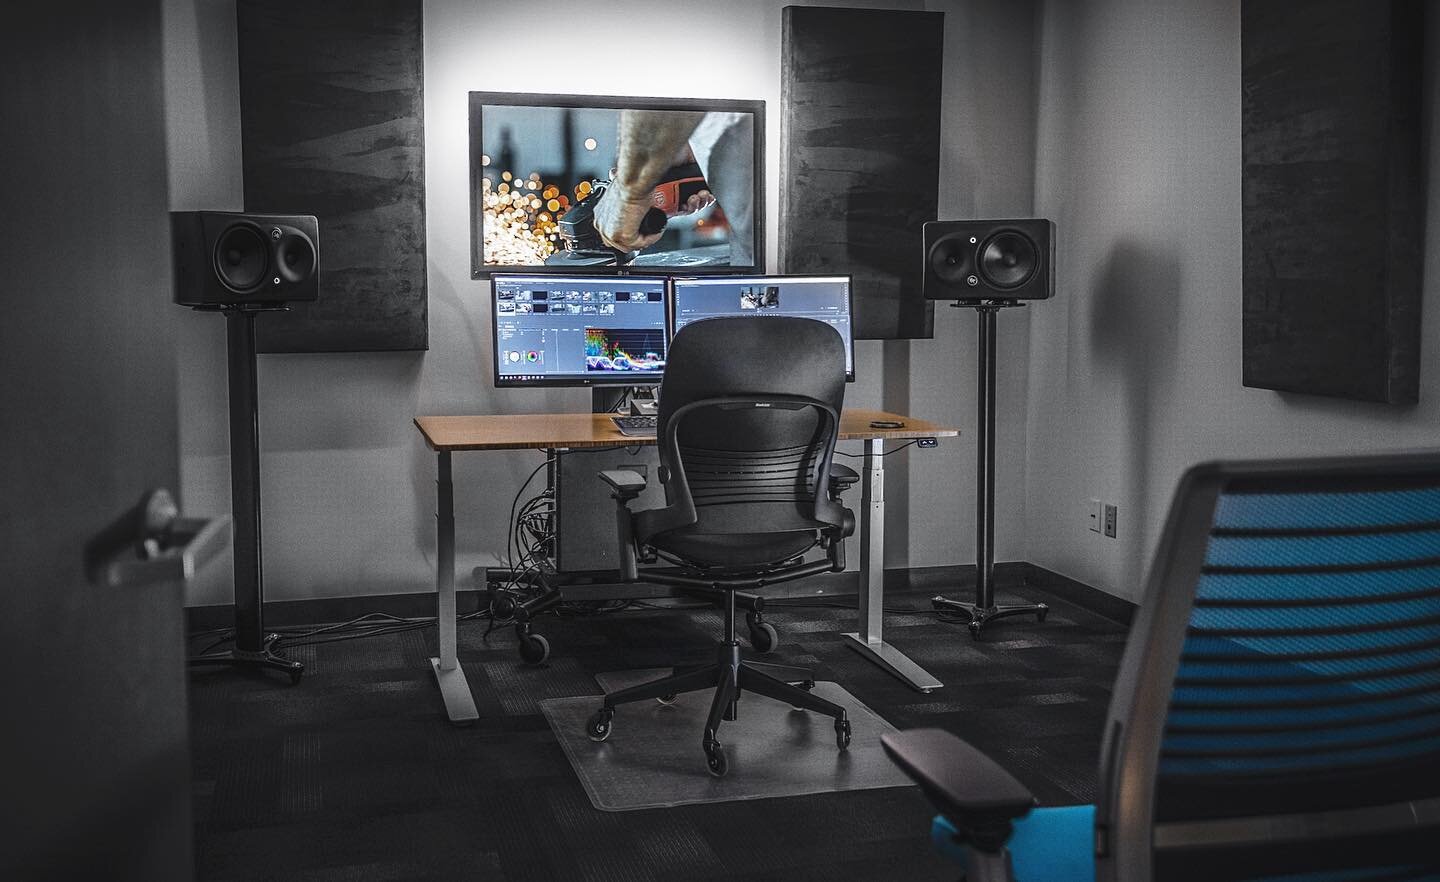 It took a minute, but our new studio is finally starting to feel like home. Happy Monday!

#videoediting #editingsuite #videoproduction #adobepremiere #working #studio #ilovemyjob